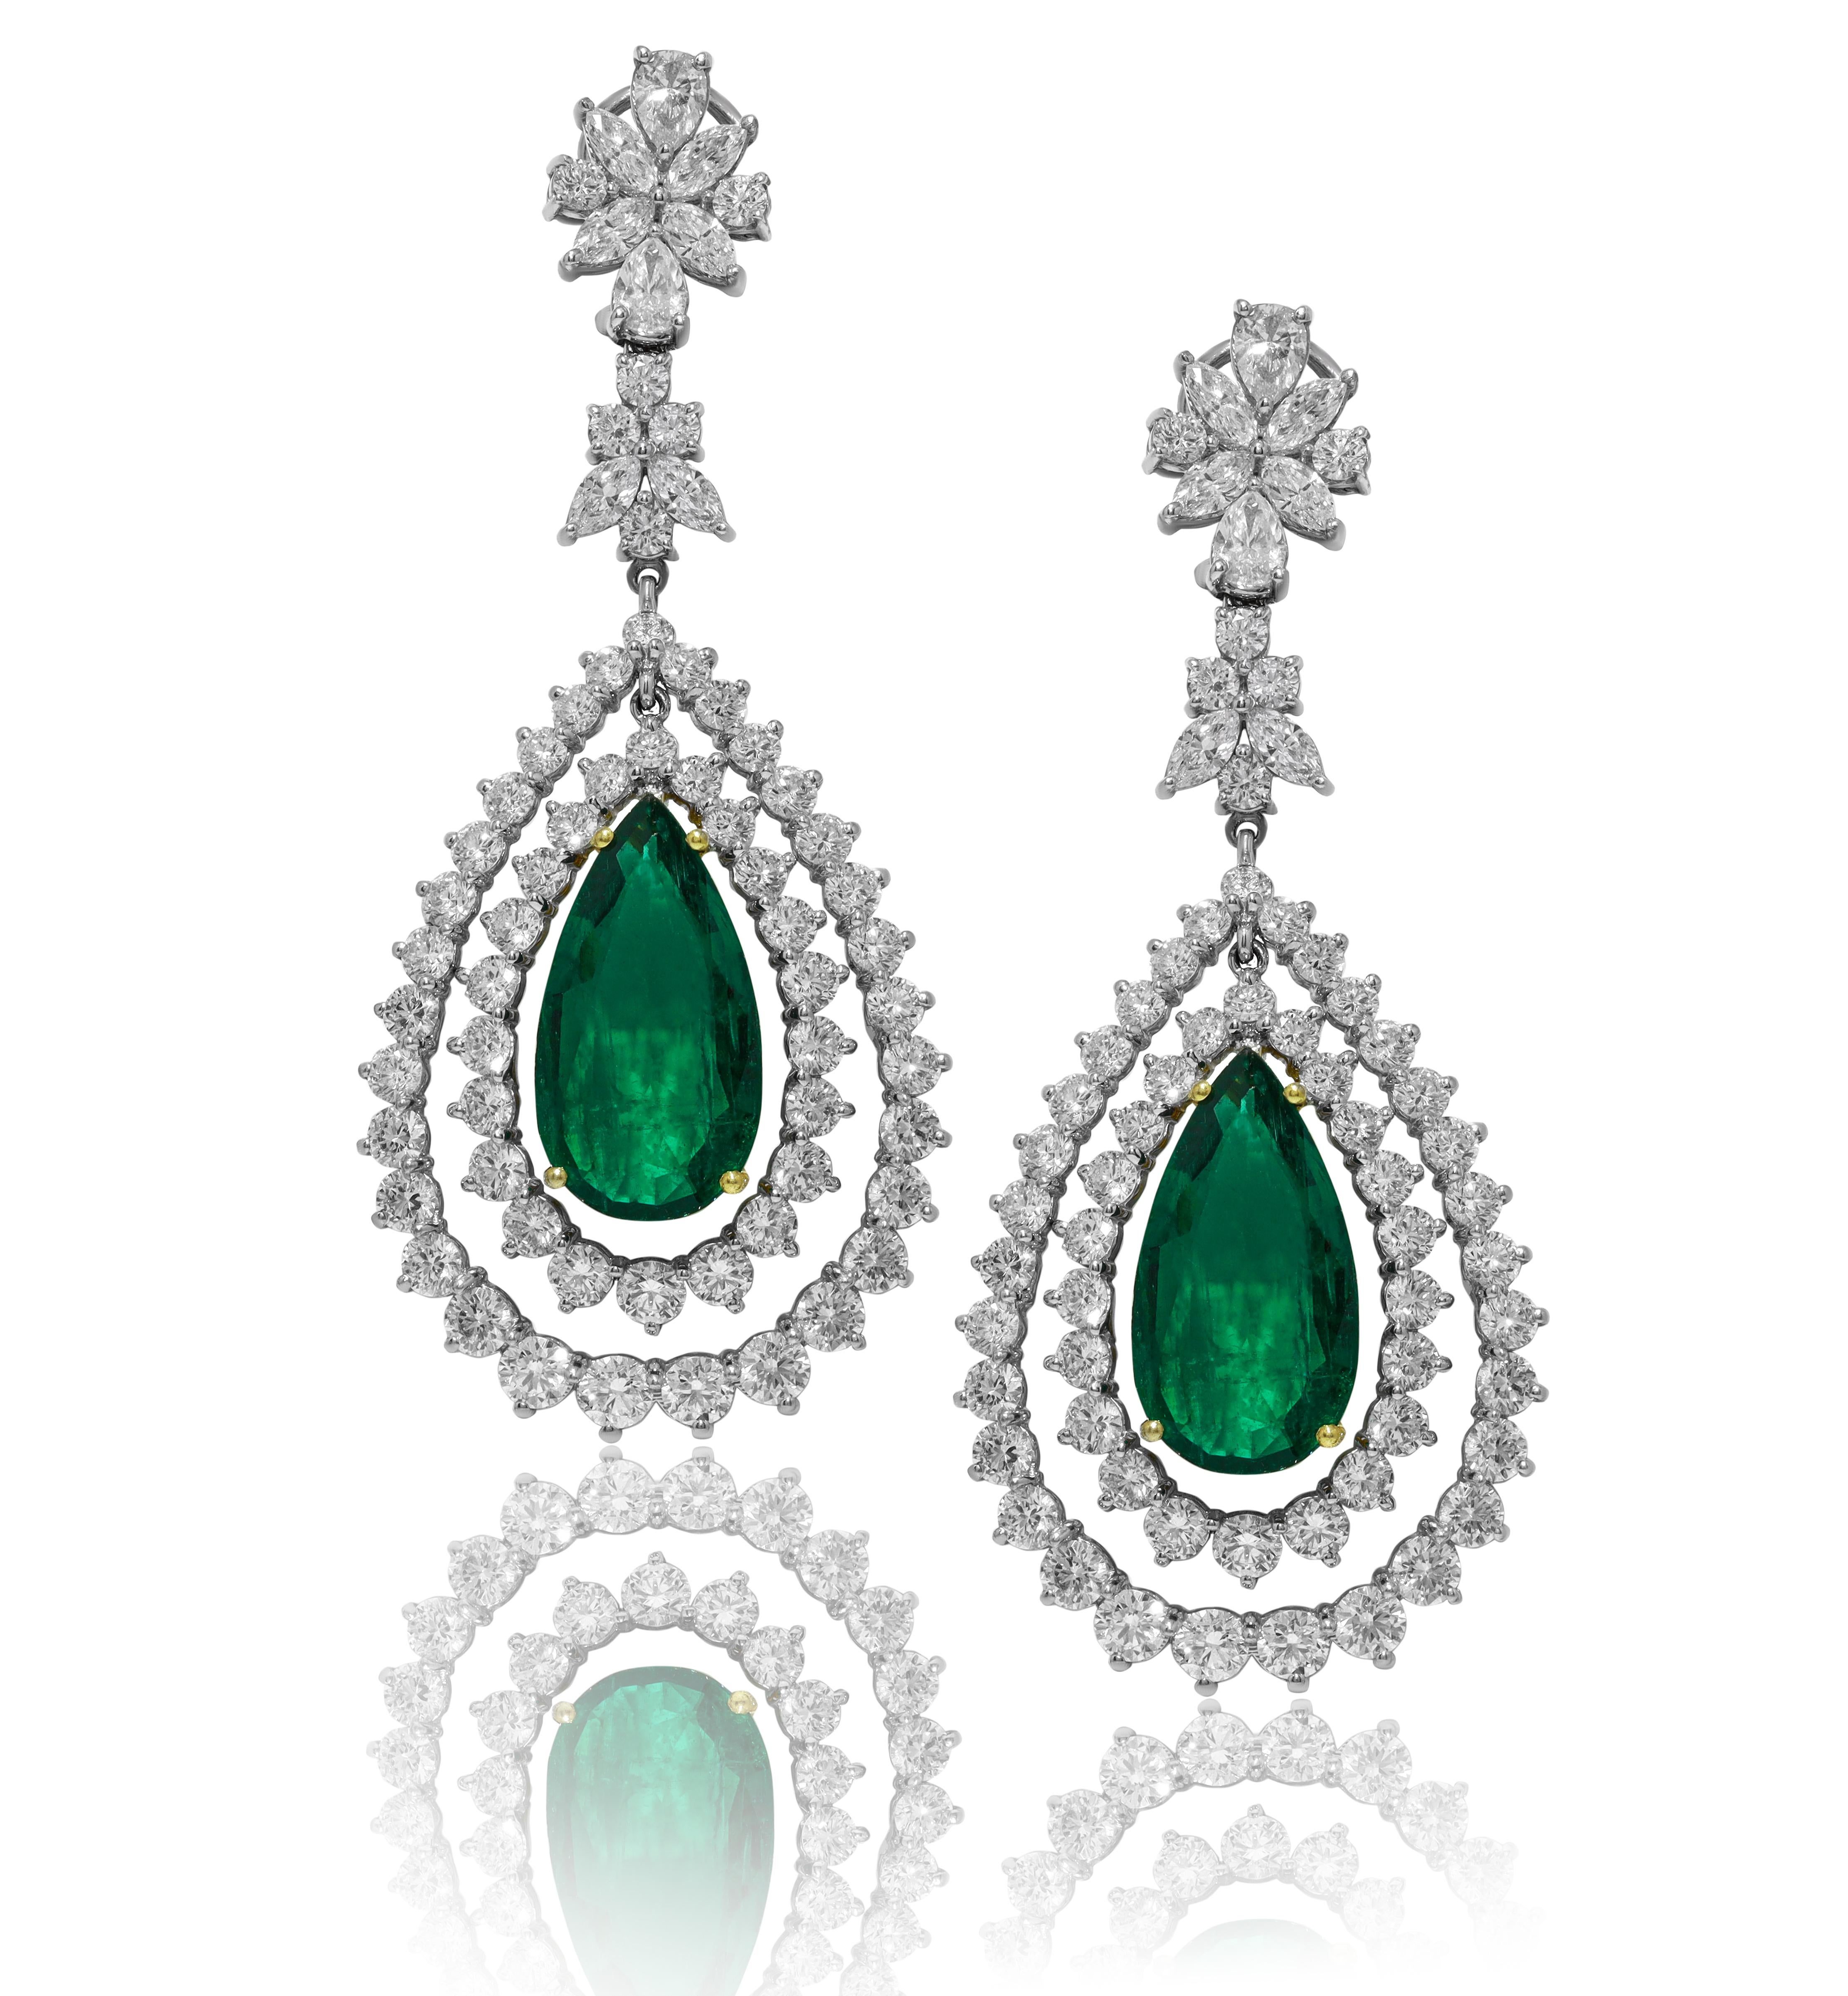 Fancy diamond emerald earrings set with 19.21 two emeralds/pear shape and two rows of round diamonds all around and dangles from two cluster clips/ps&mq
